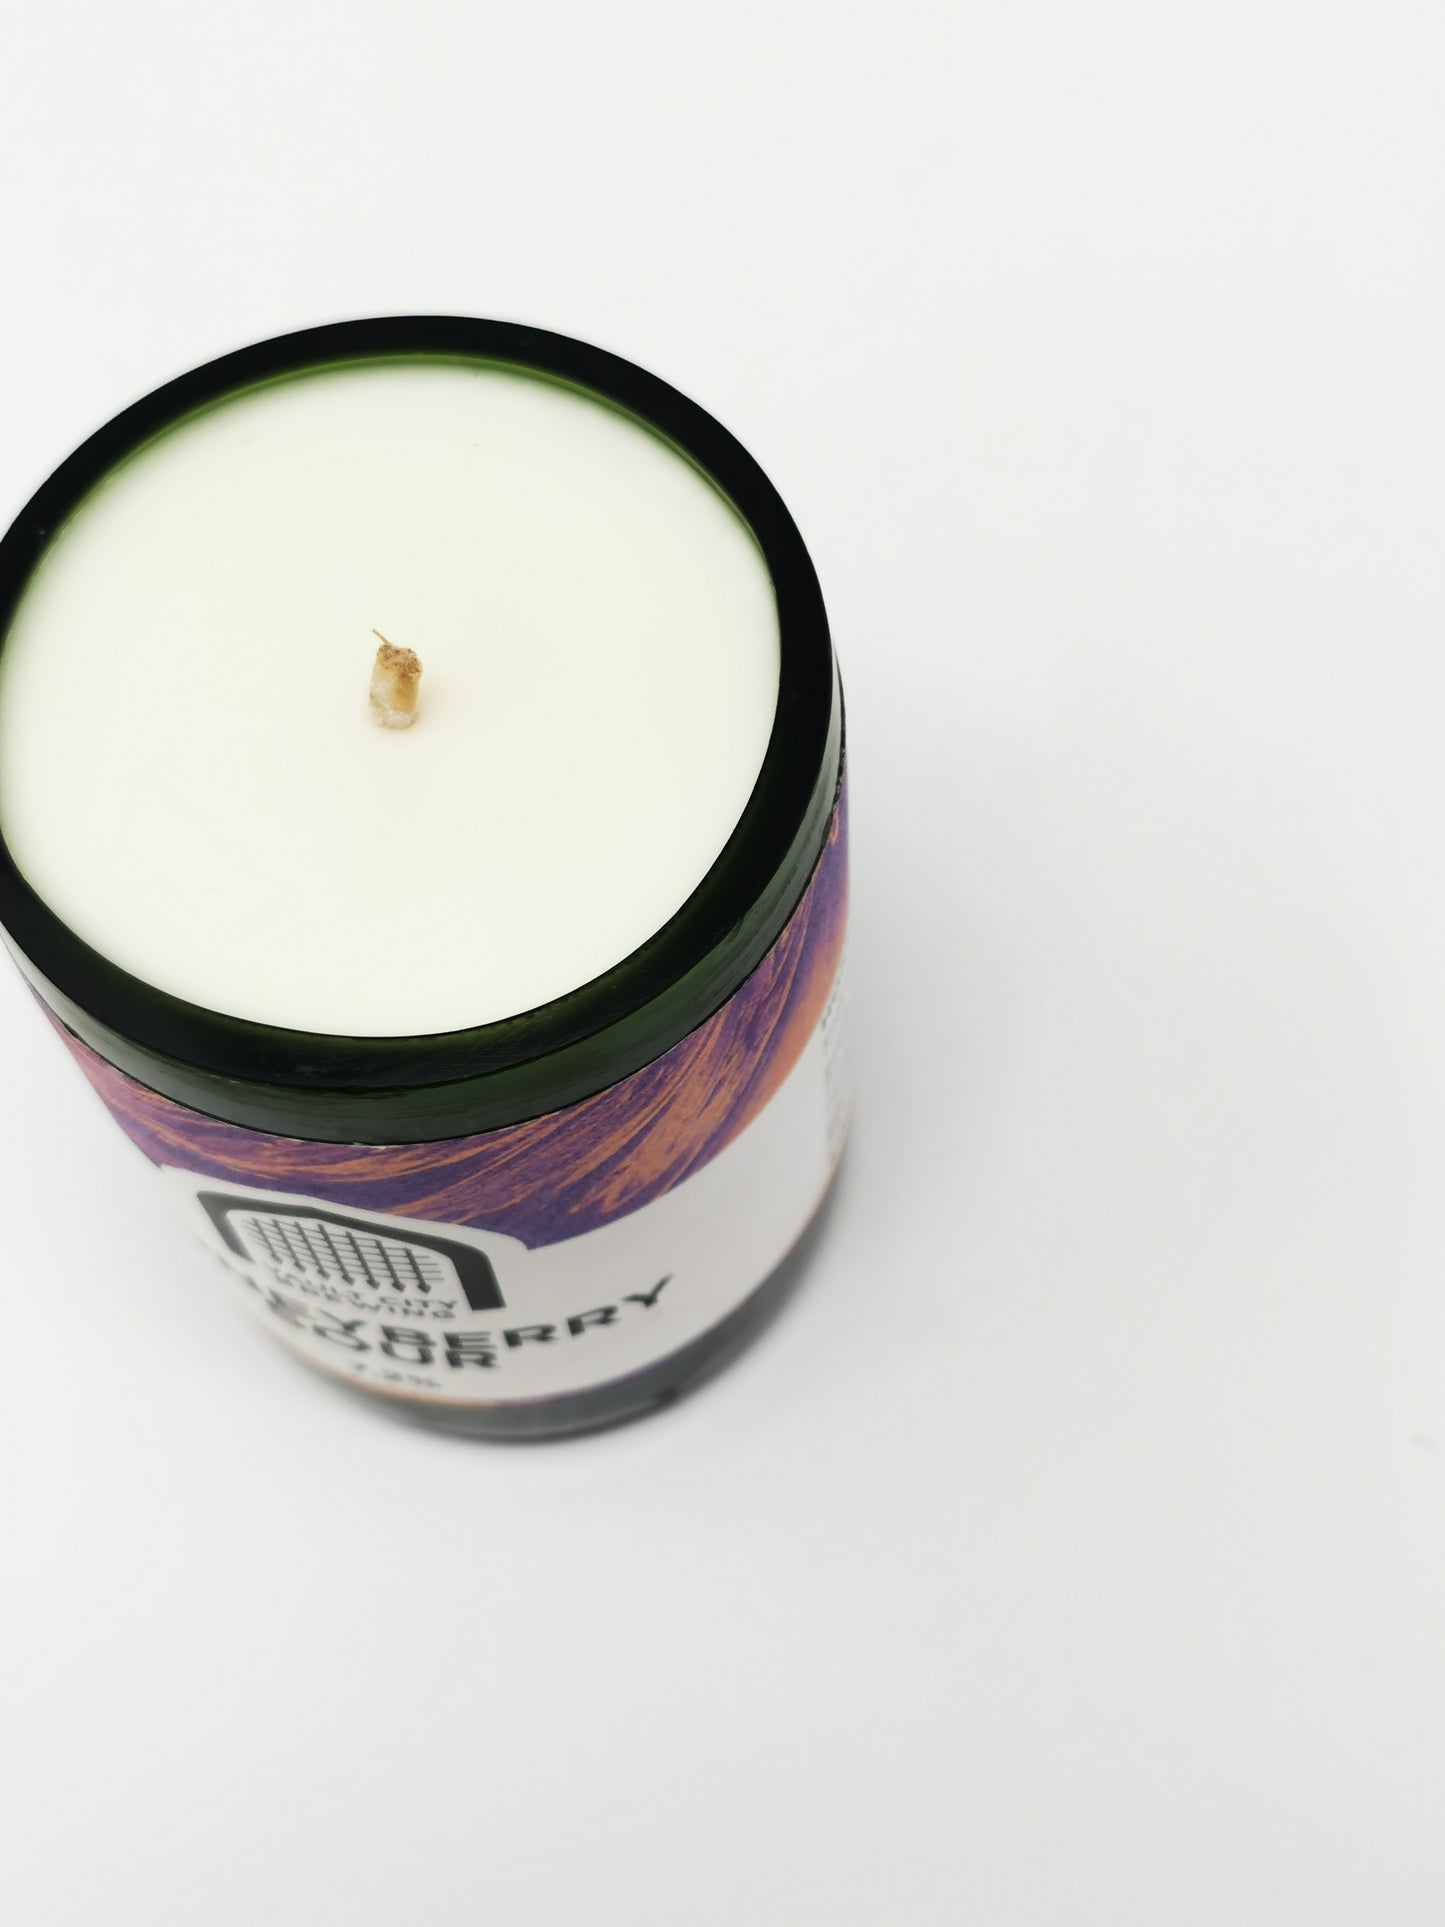 Eco Friendly-Honeyberry Sour Beer Bottle Candle-Beer & Ale Bottle Candles-Adhock Homeware